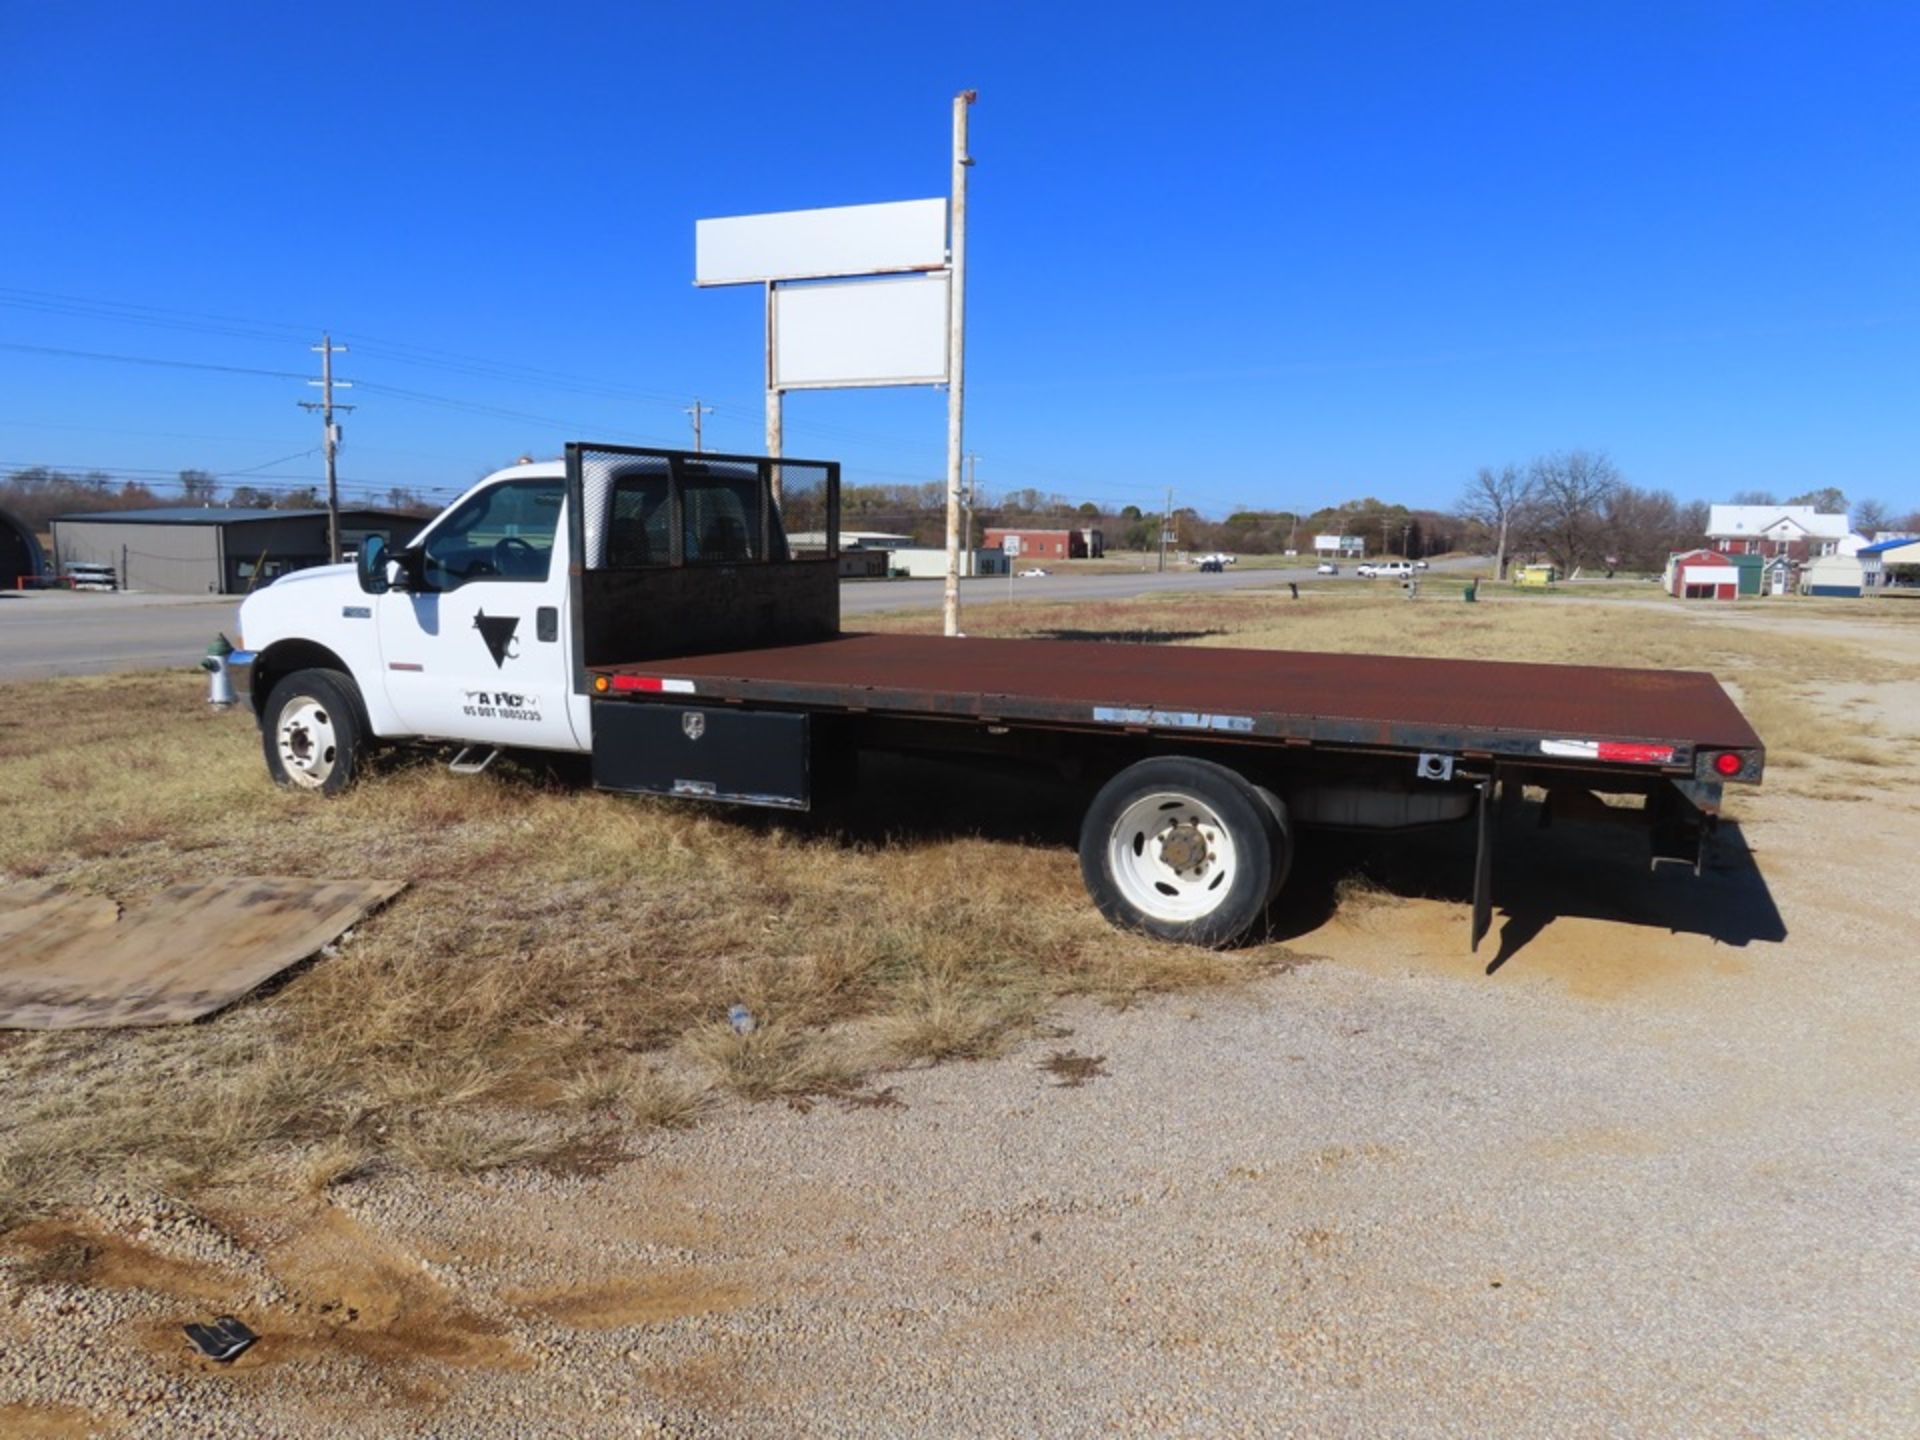 2004 FORD F550XL FLATBED TRUCK, VIN# 1FDAF56P04EB24794, 228,693 MILES - Image 2 of 4